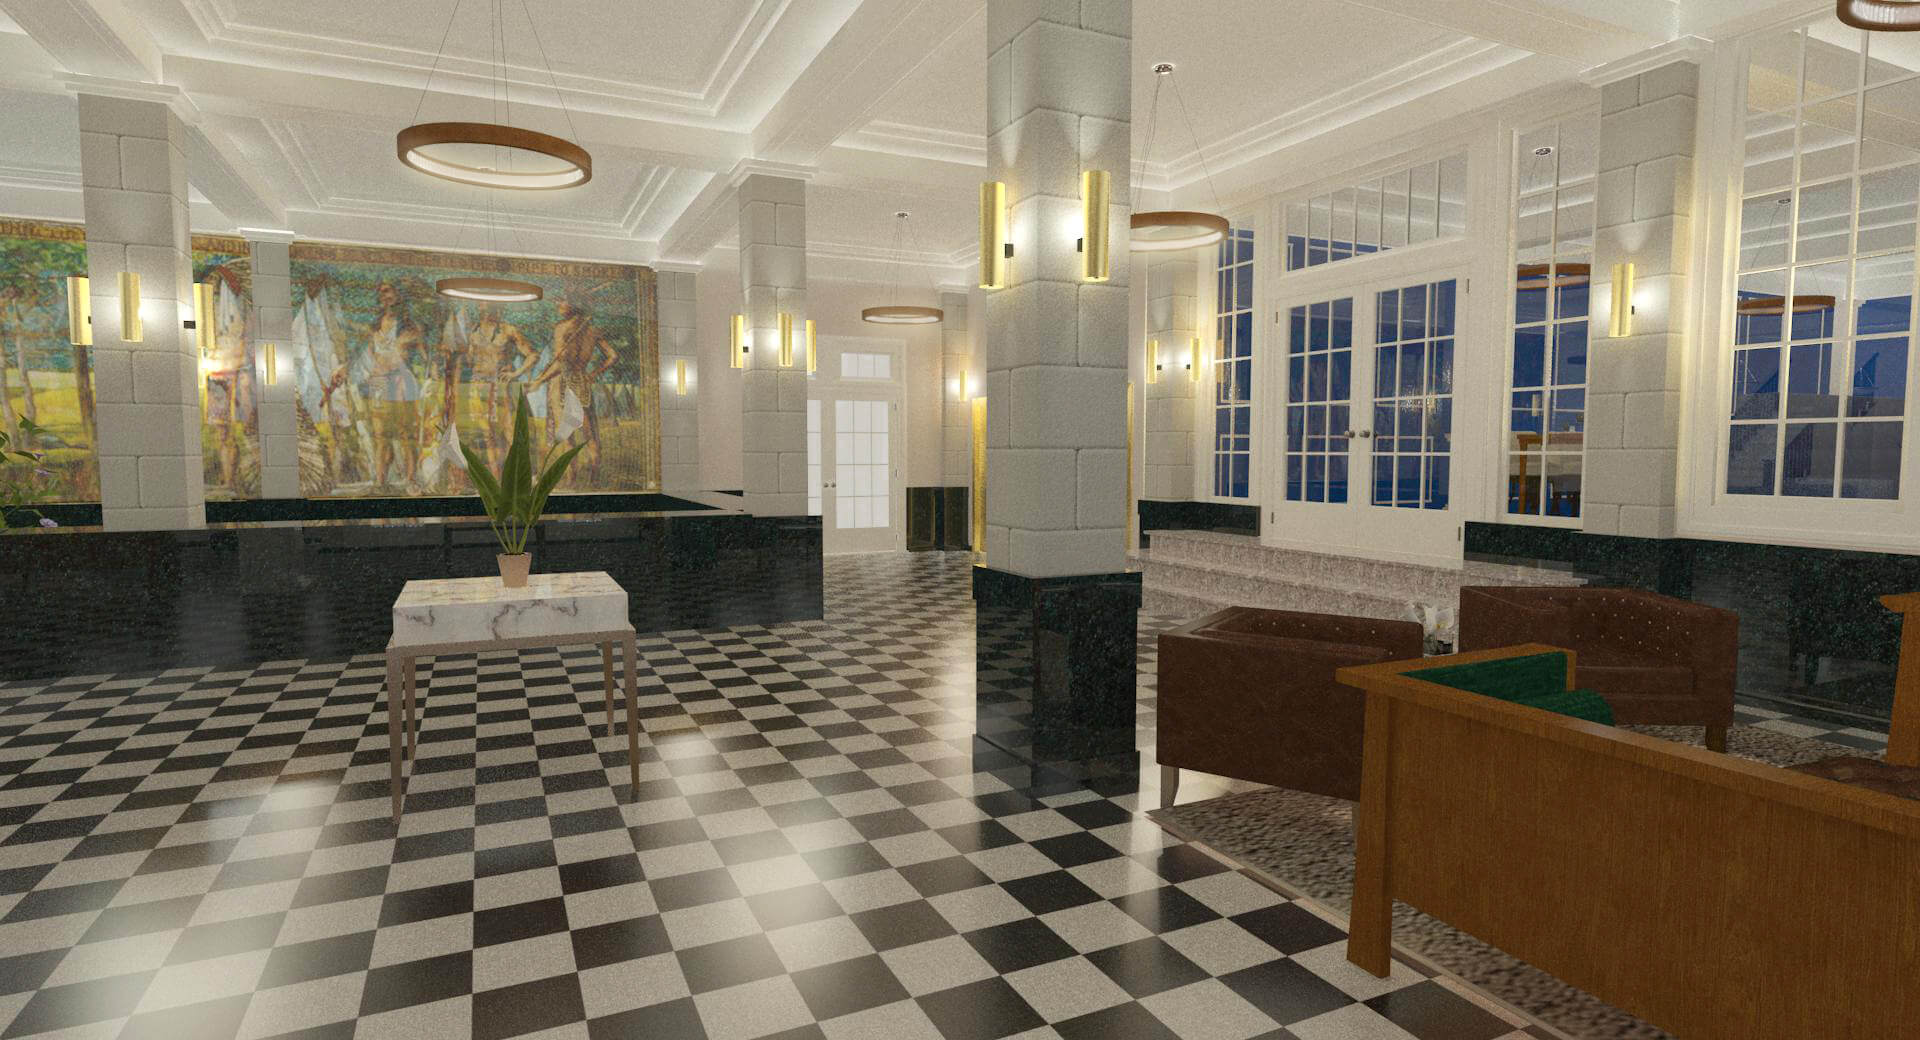 Rendering for new lobby of Kaskaskia hotel with checked floor and large painted mural behind lobby desk